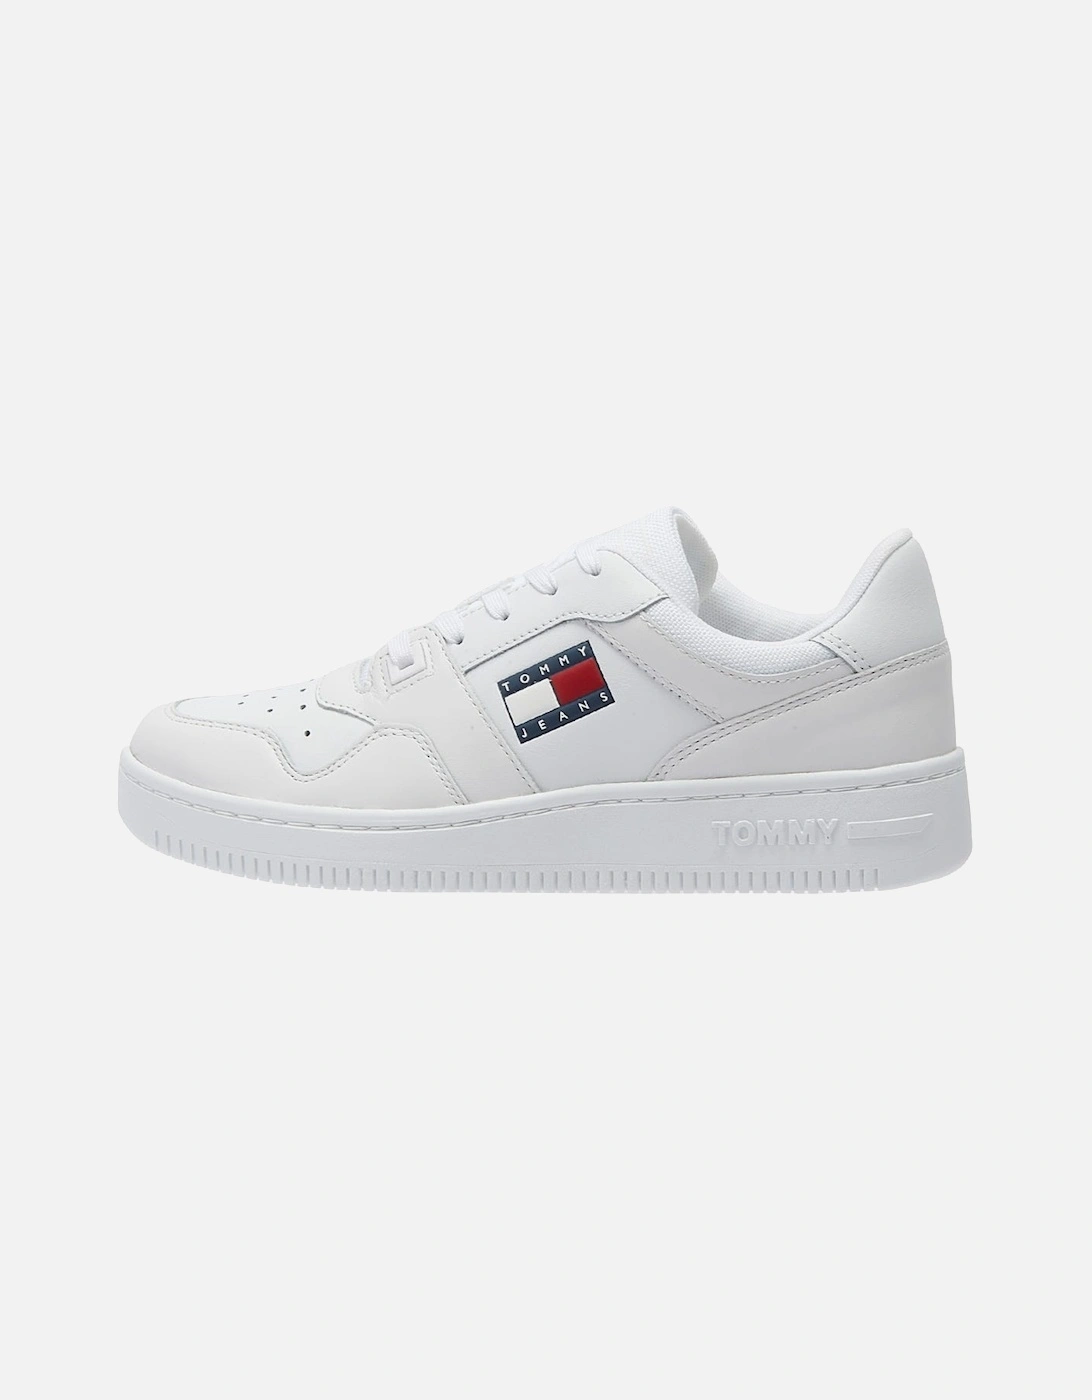 Jeans Retro Basket Womens White Leather Trainers